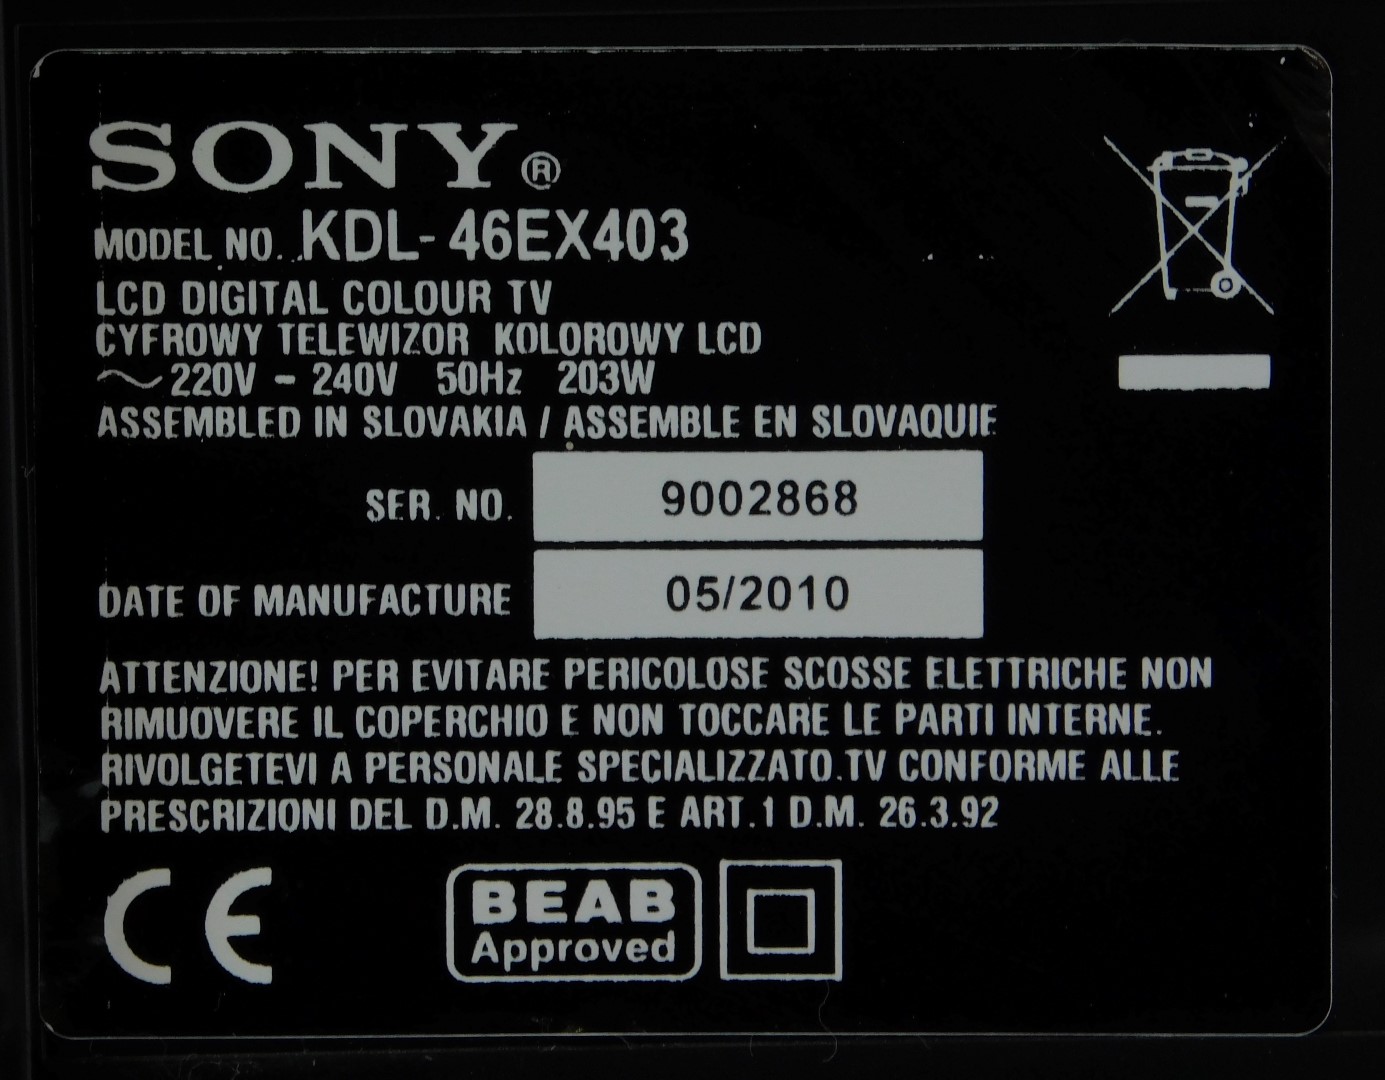 A Sony Bravia 46" LCD digital colour television, model number KDL-46EX403, with remote. - Image 3 of 3